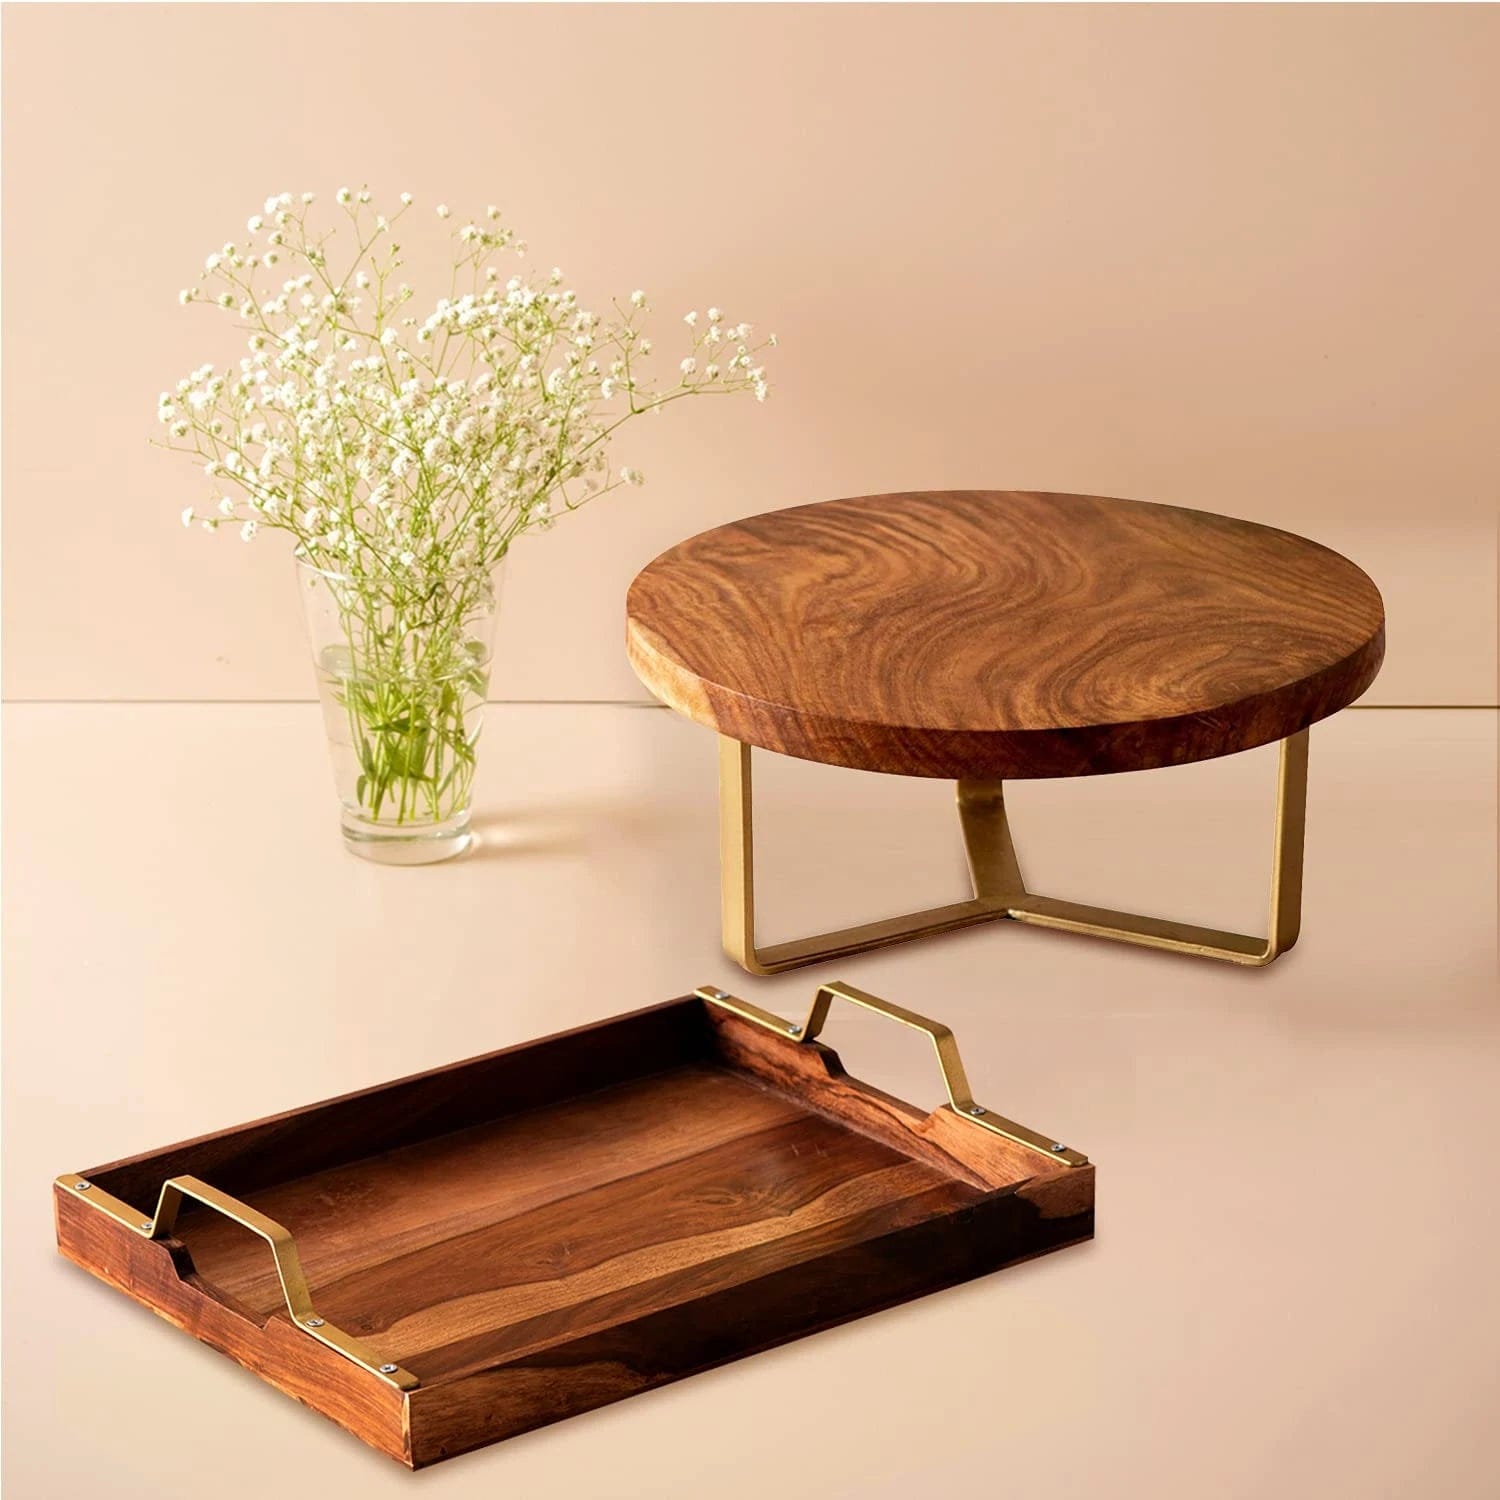 Buy Copper Teak Wood Cake Stand Online at Best Price in India - Nestroots